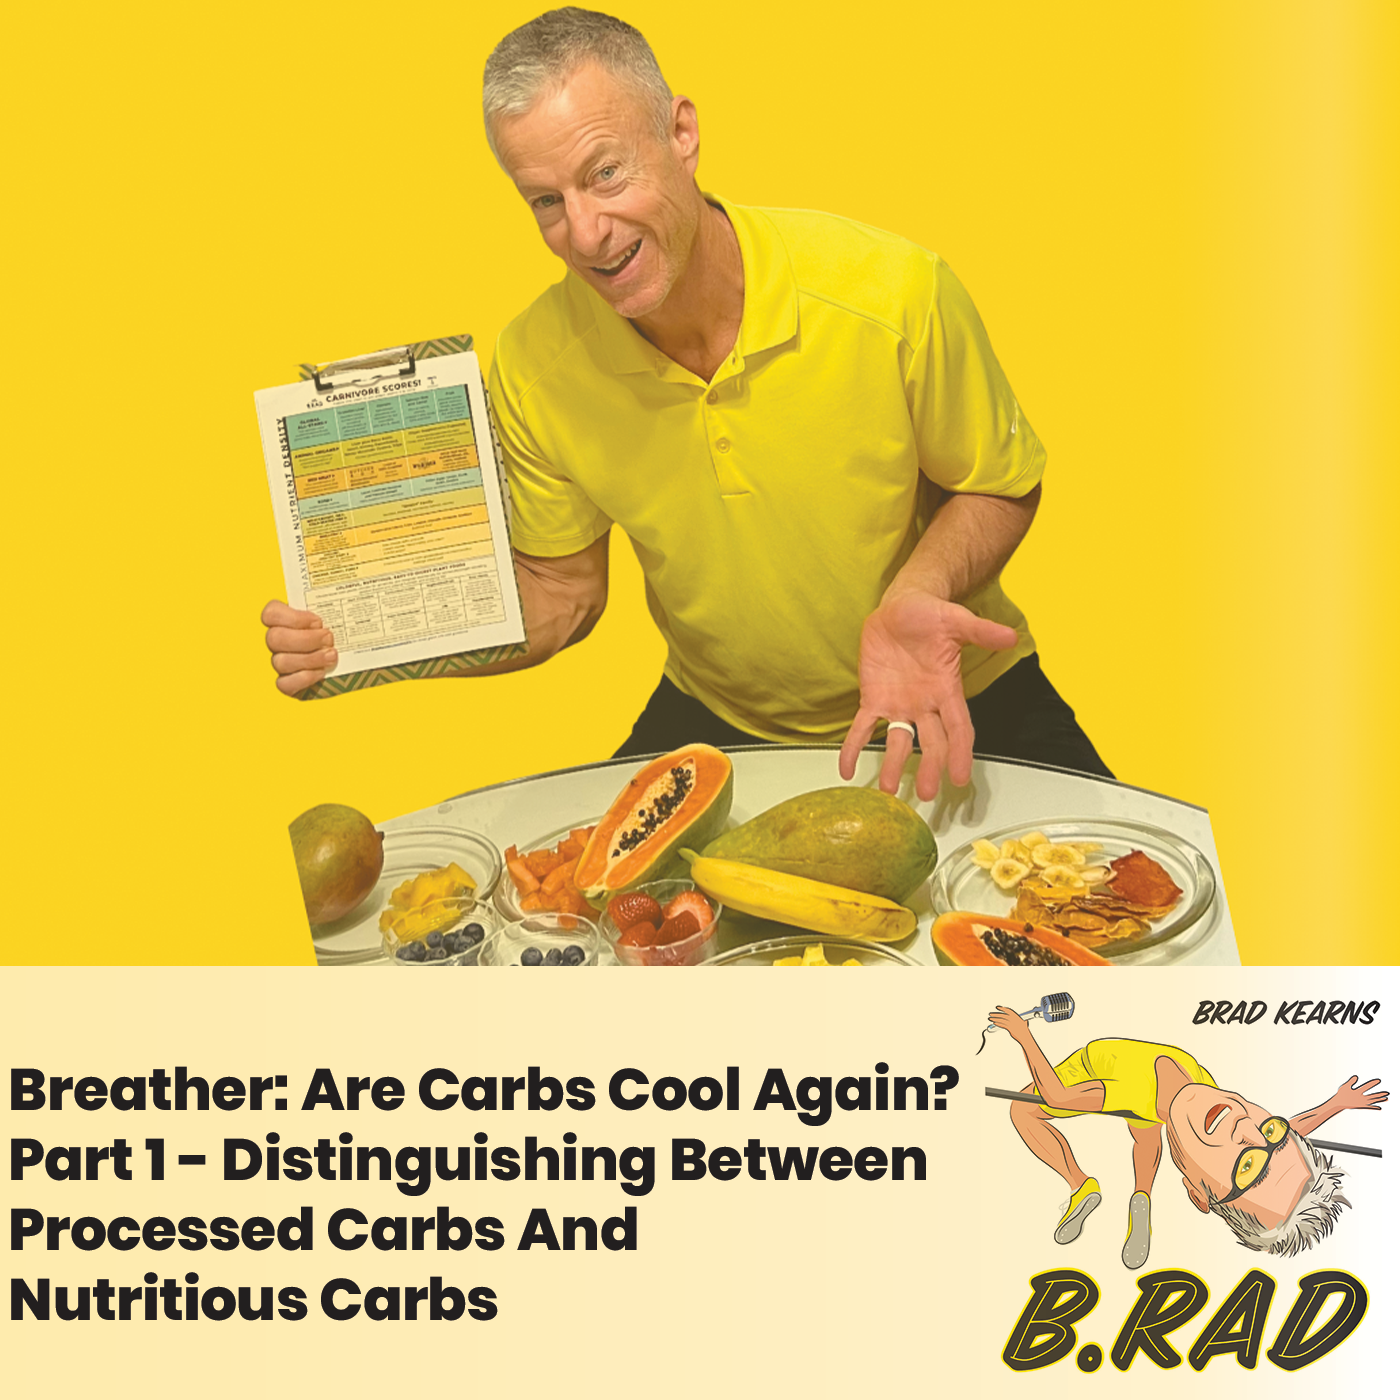 Breather: Are Carbs Cool Again? Part 1 - Distinguishing Between Processed Carbs And Nutritious Carbs